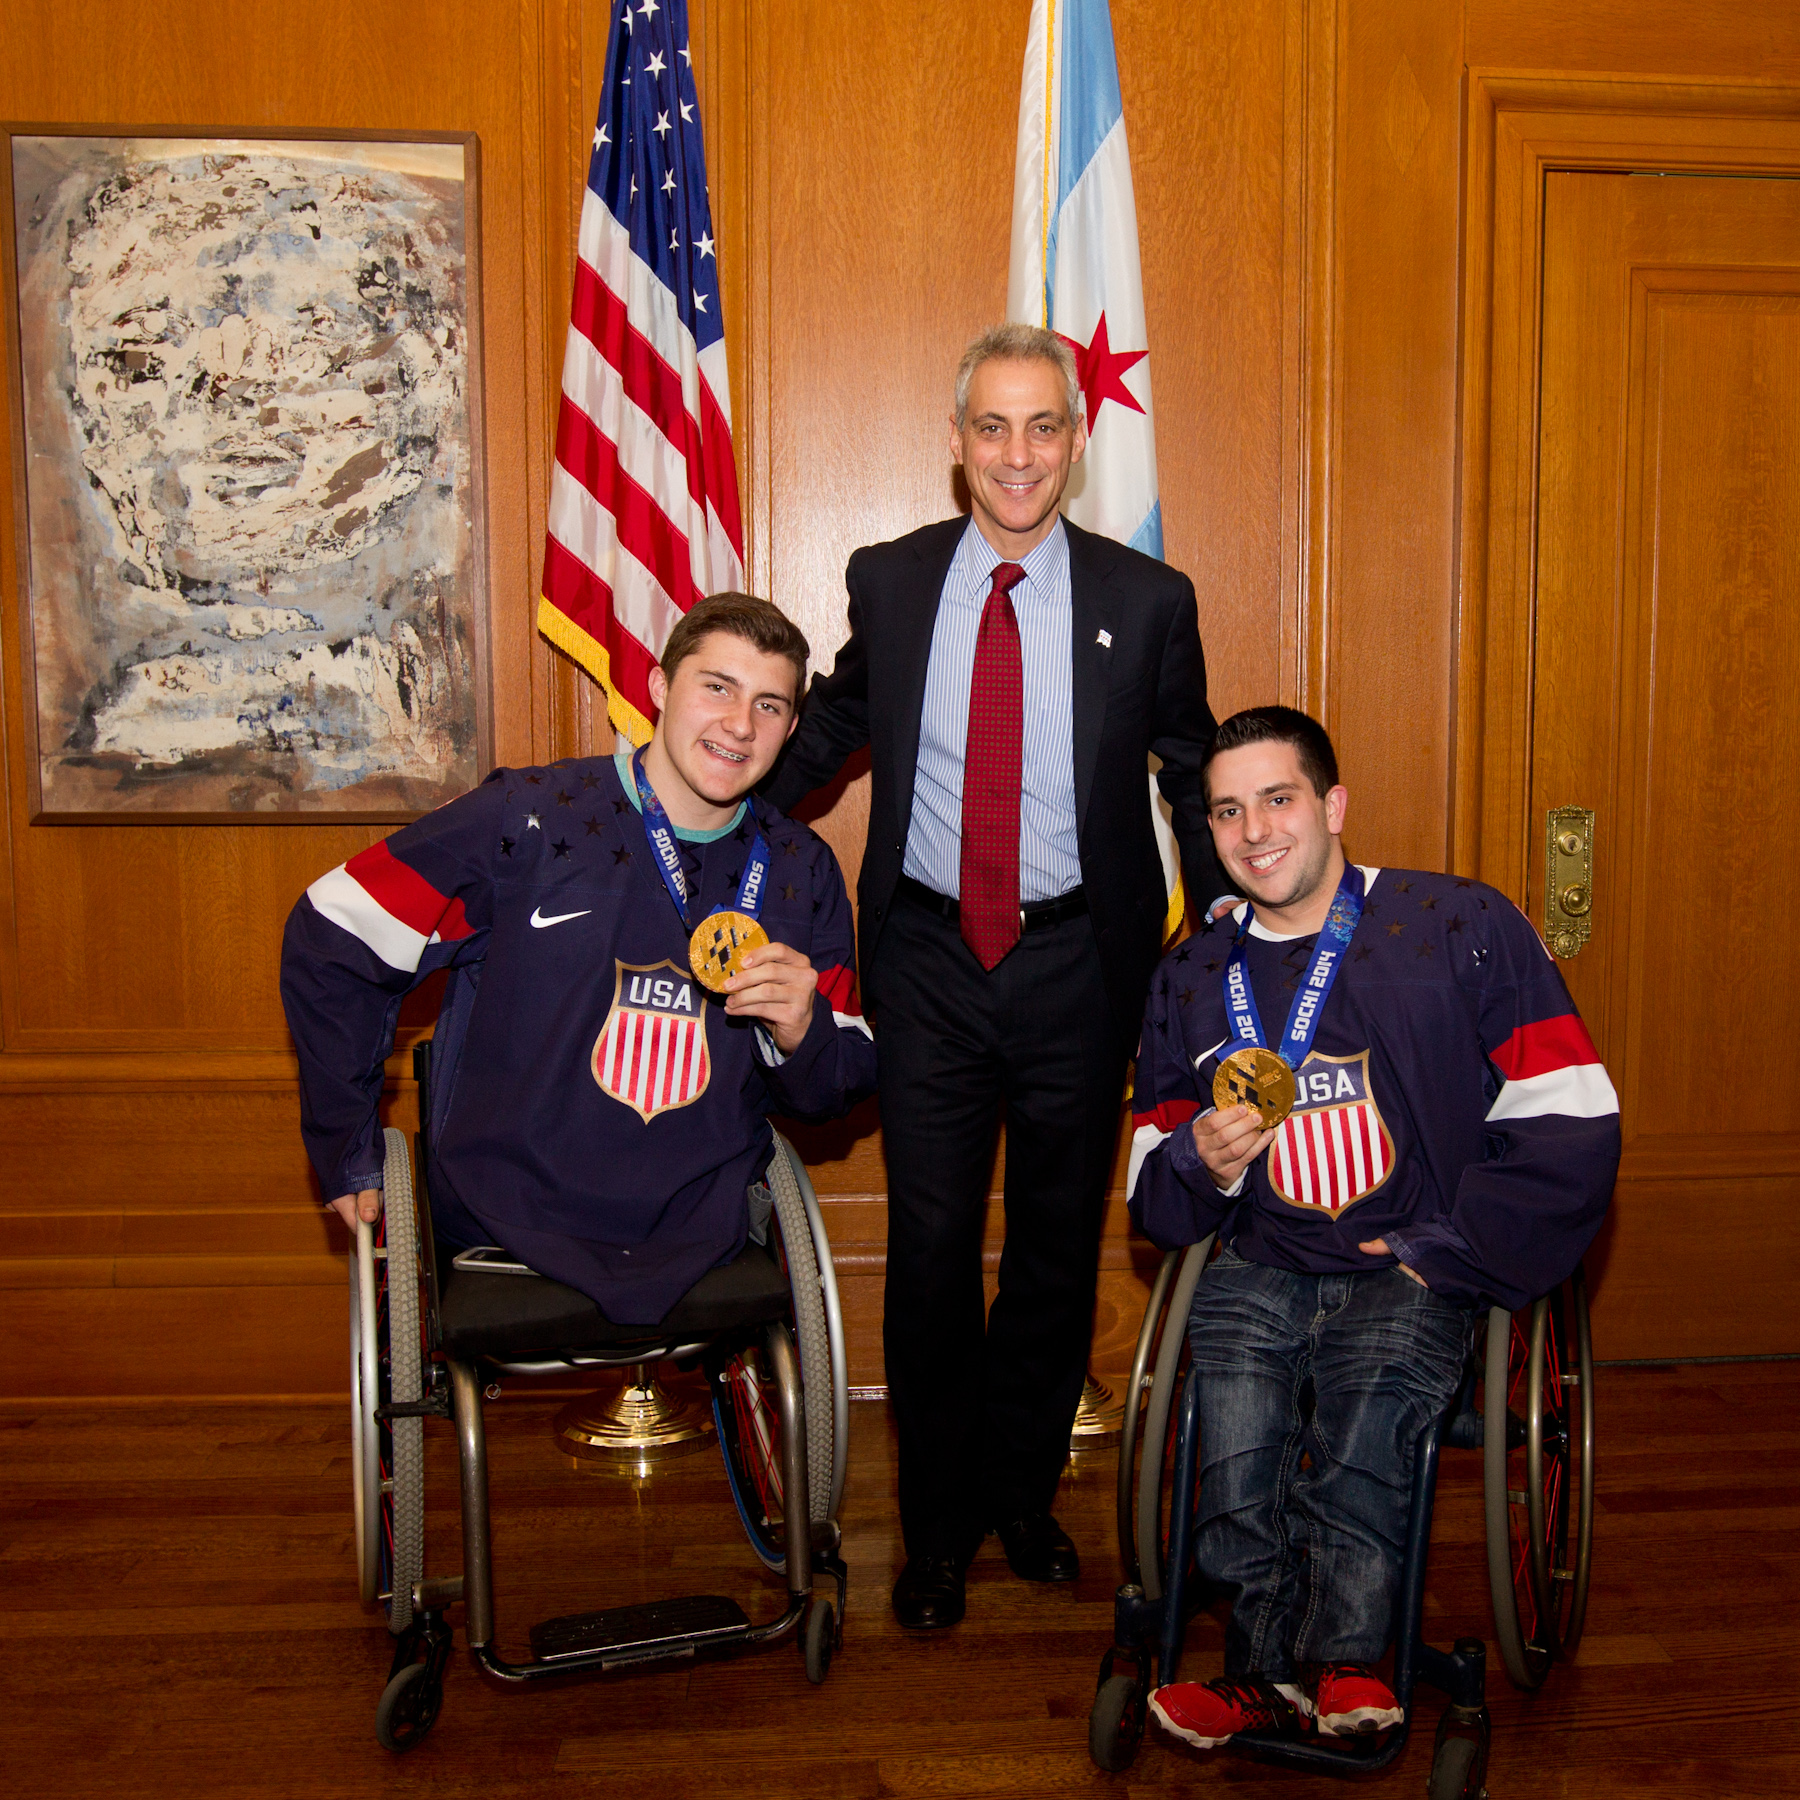 Mayor Rahm Emanuel meets with Paralympians Brody Roybal and Kevin Mckee